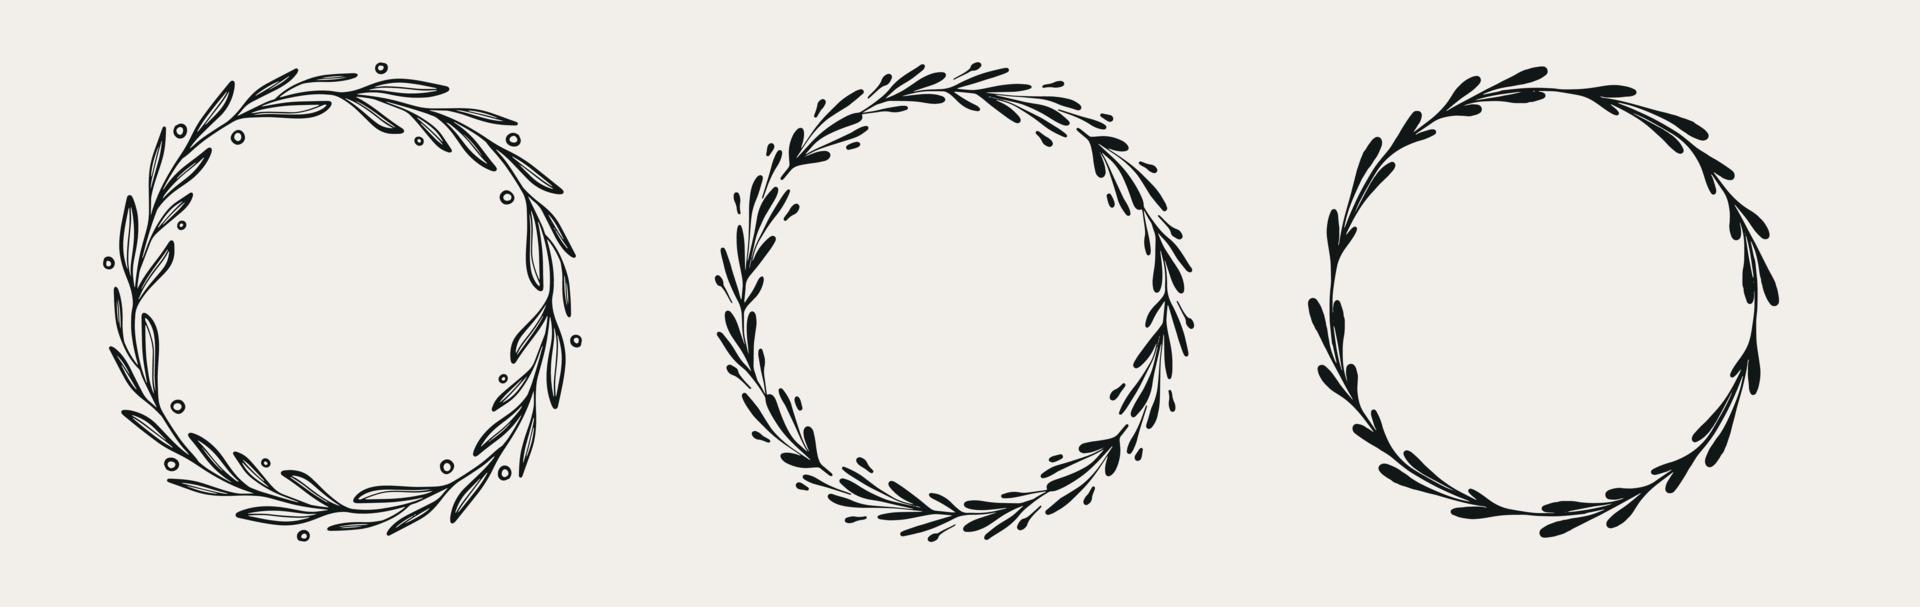 Set of black decorative Circle floral frame. Vector Wreath with branches, herbs, plants, leaves